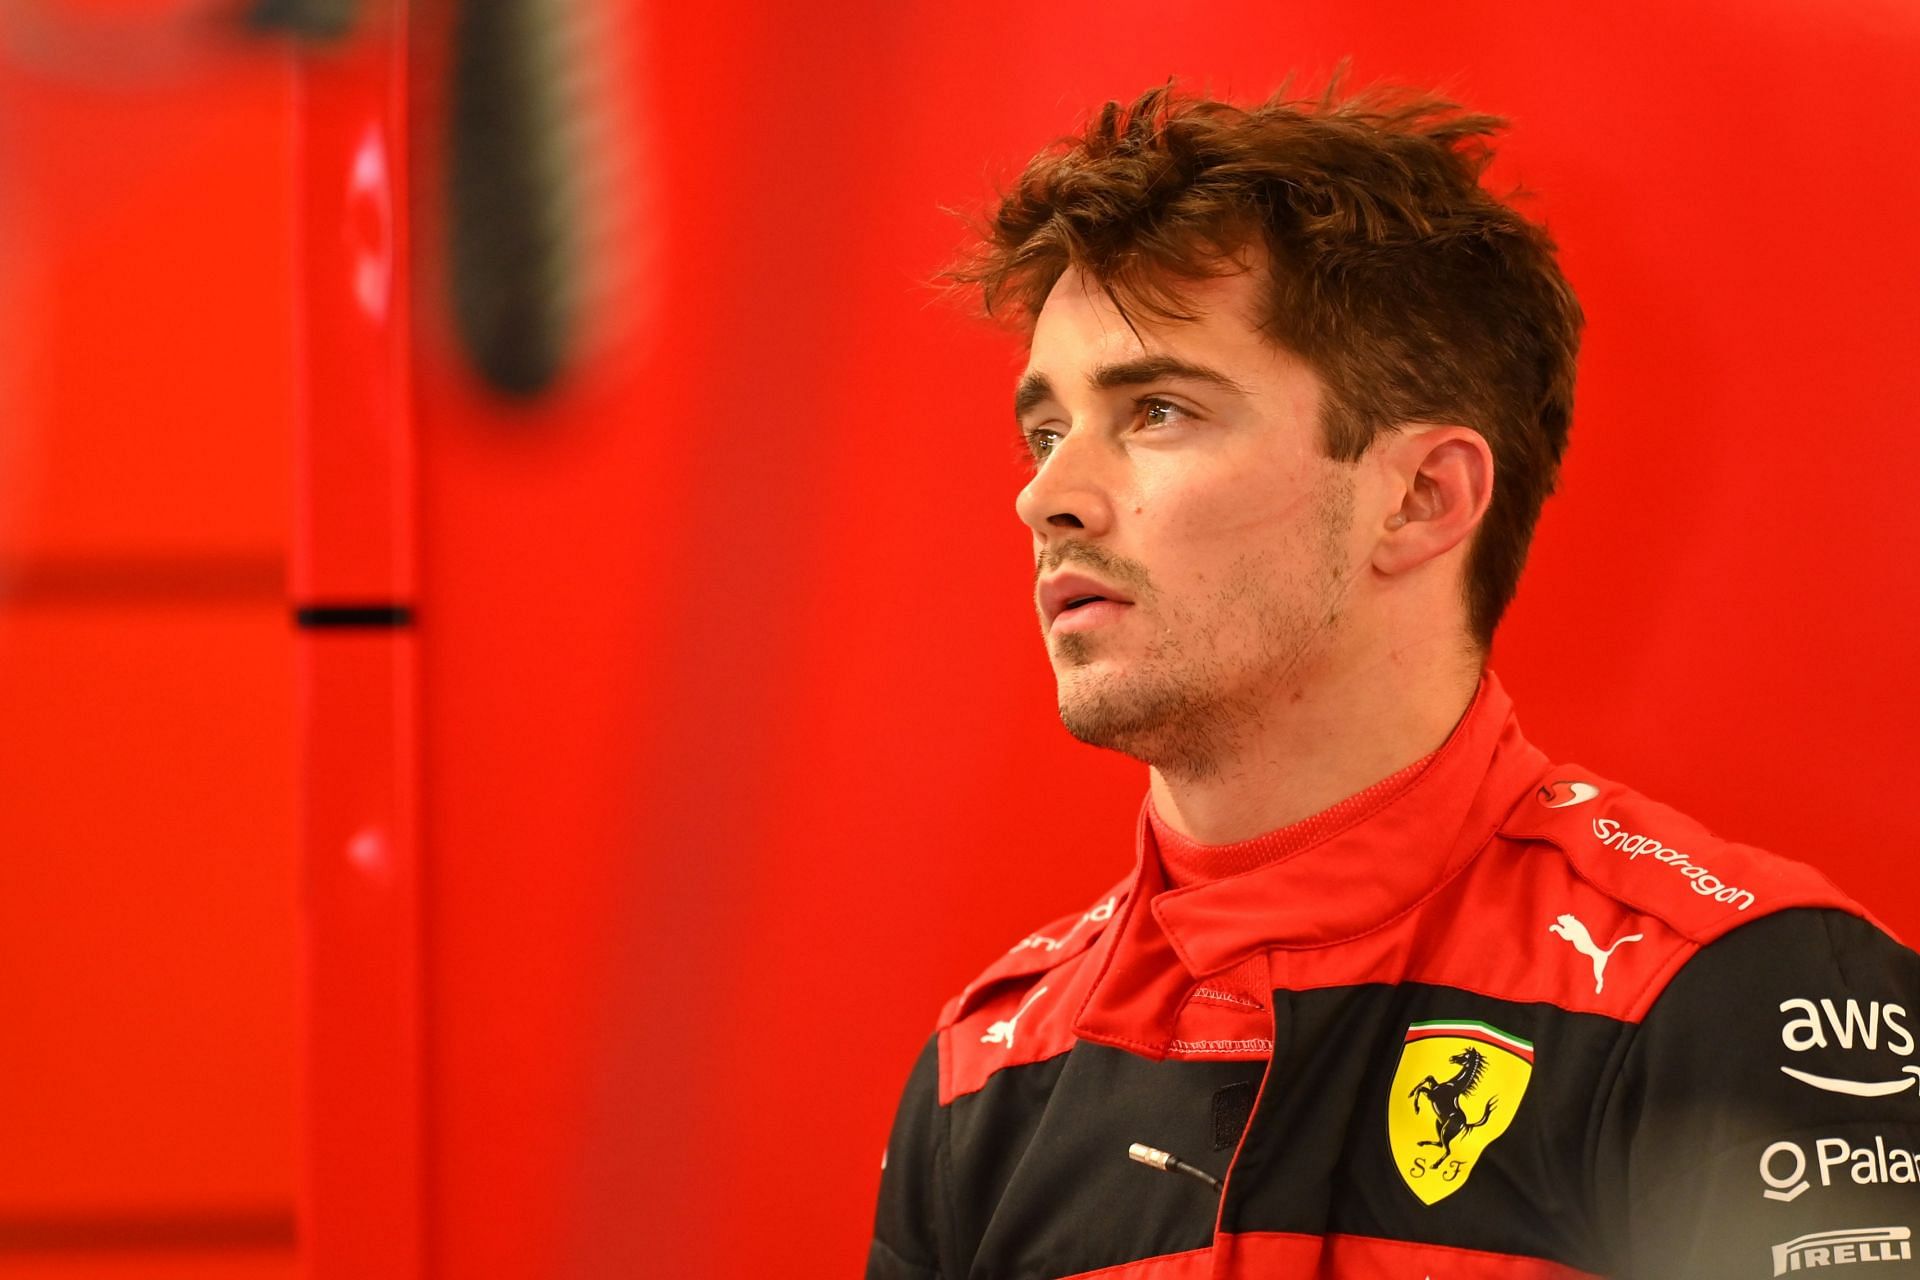 Ferrari driver Charles Leclerc photographed in the paddock during the 2022 F1 Hungarian GP weekend (Photo by Dan Mullan/Getty Images)